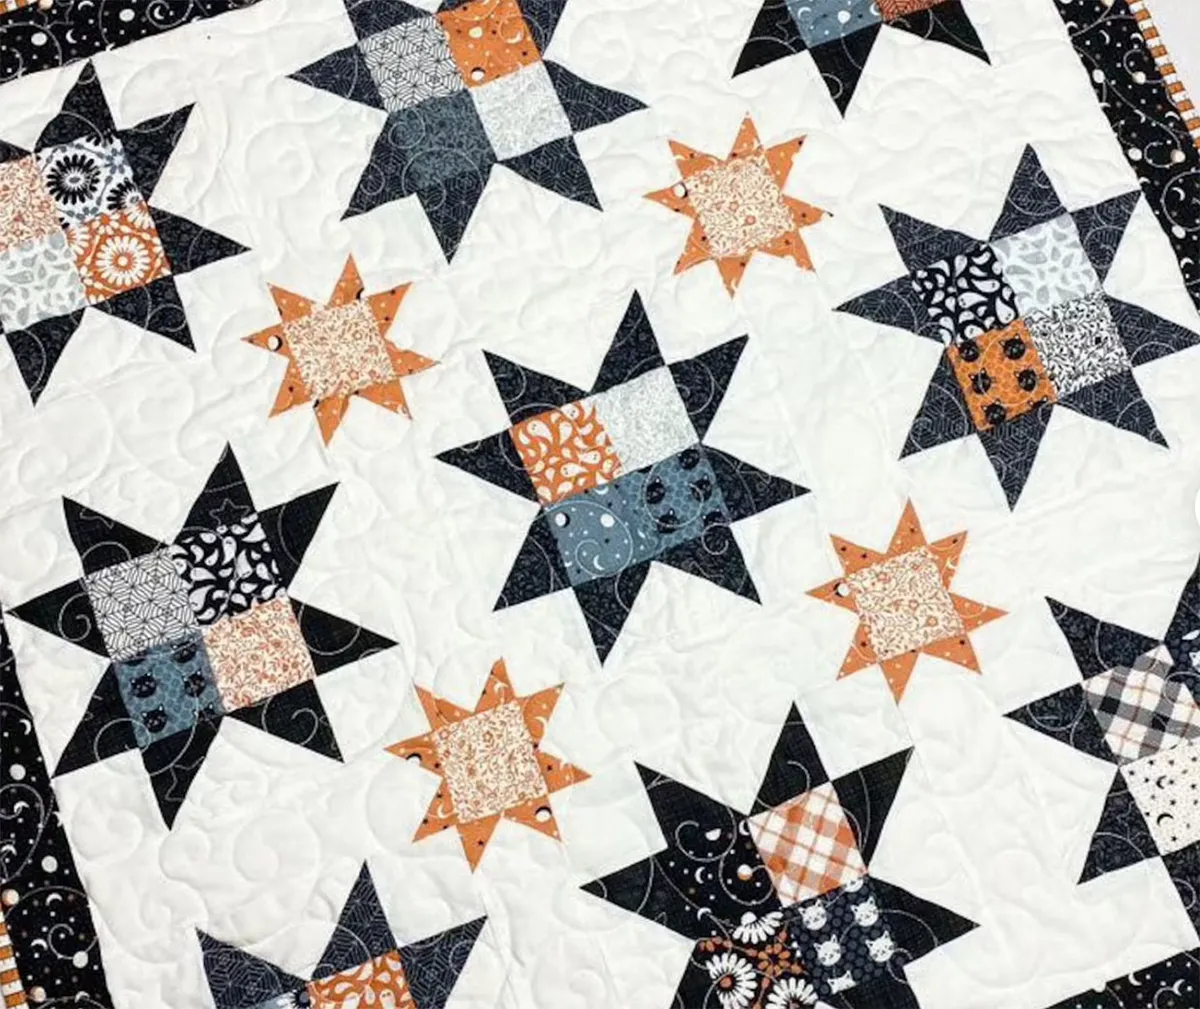 Halloween sewing patterns – spooktacular stars quilt